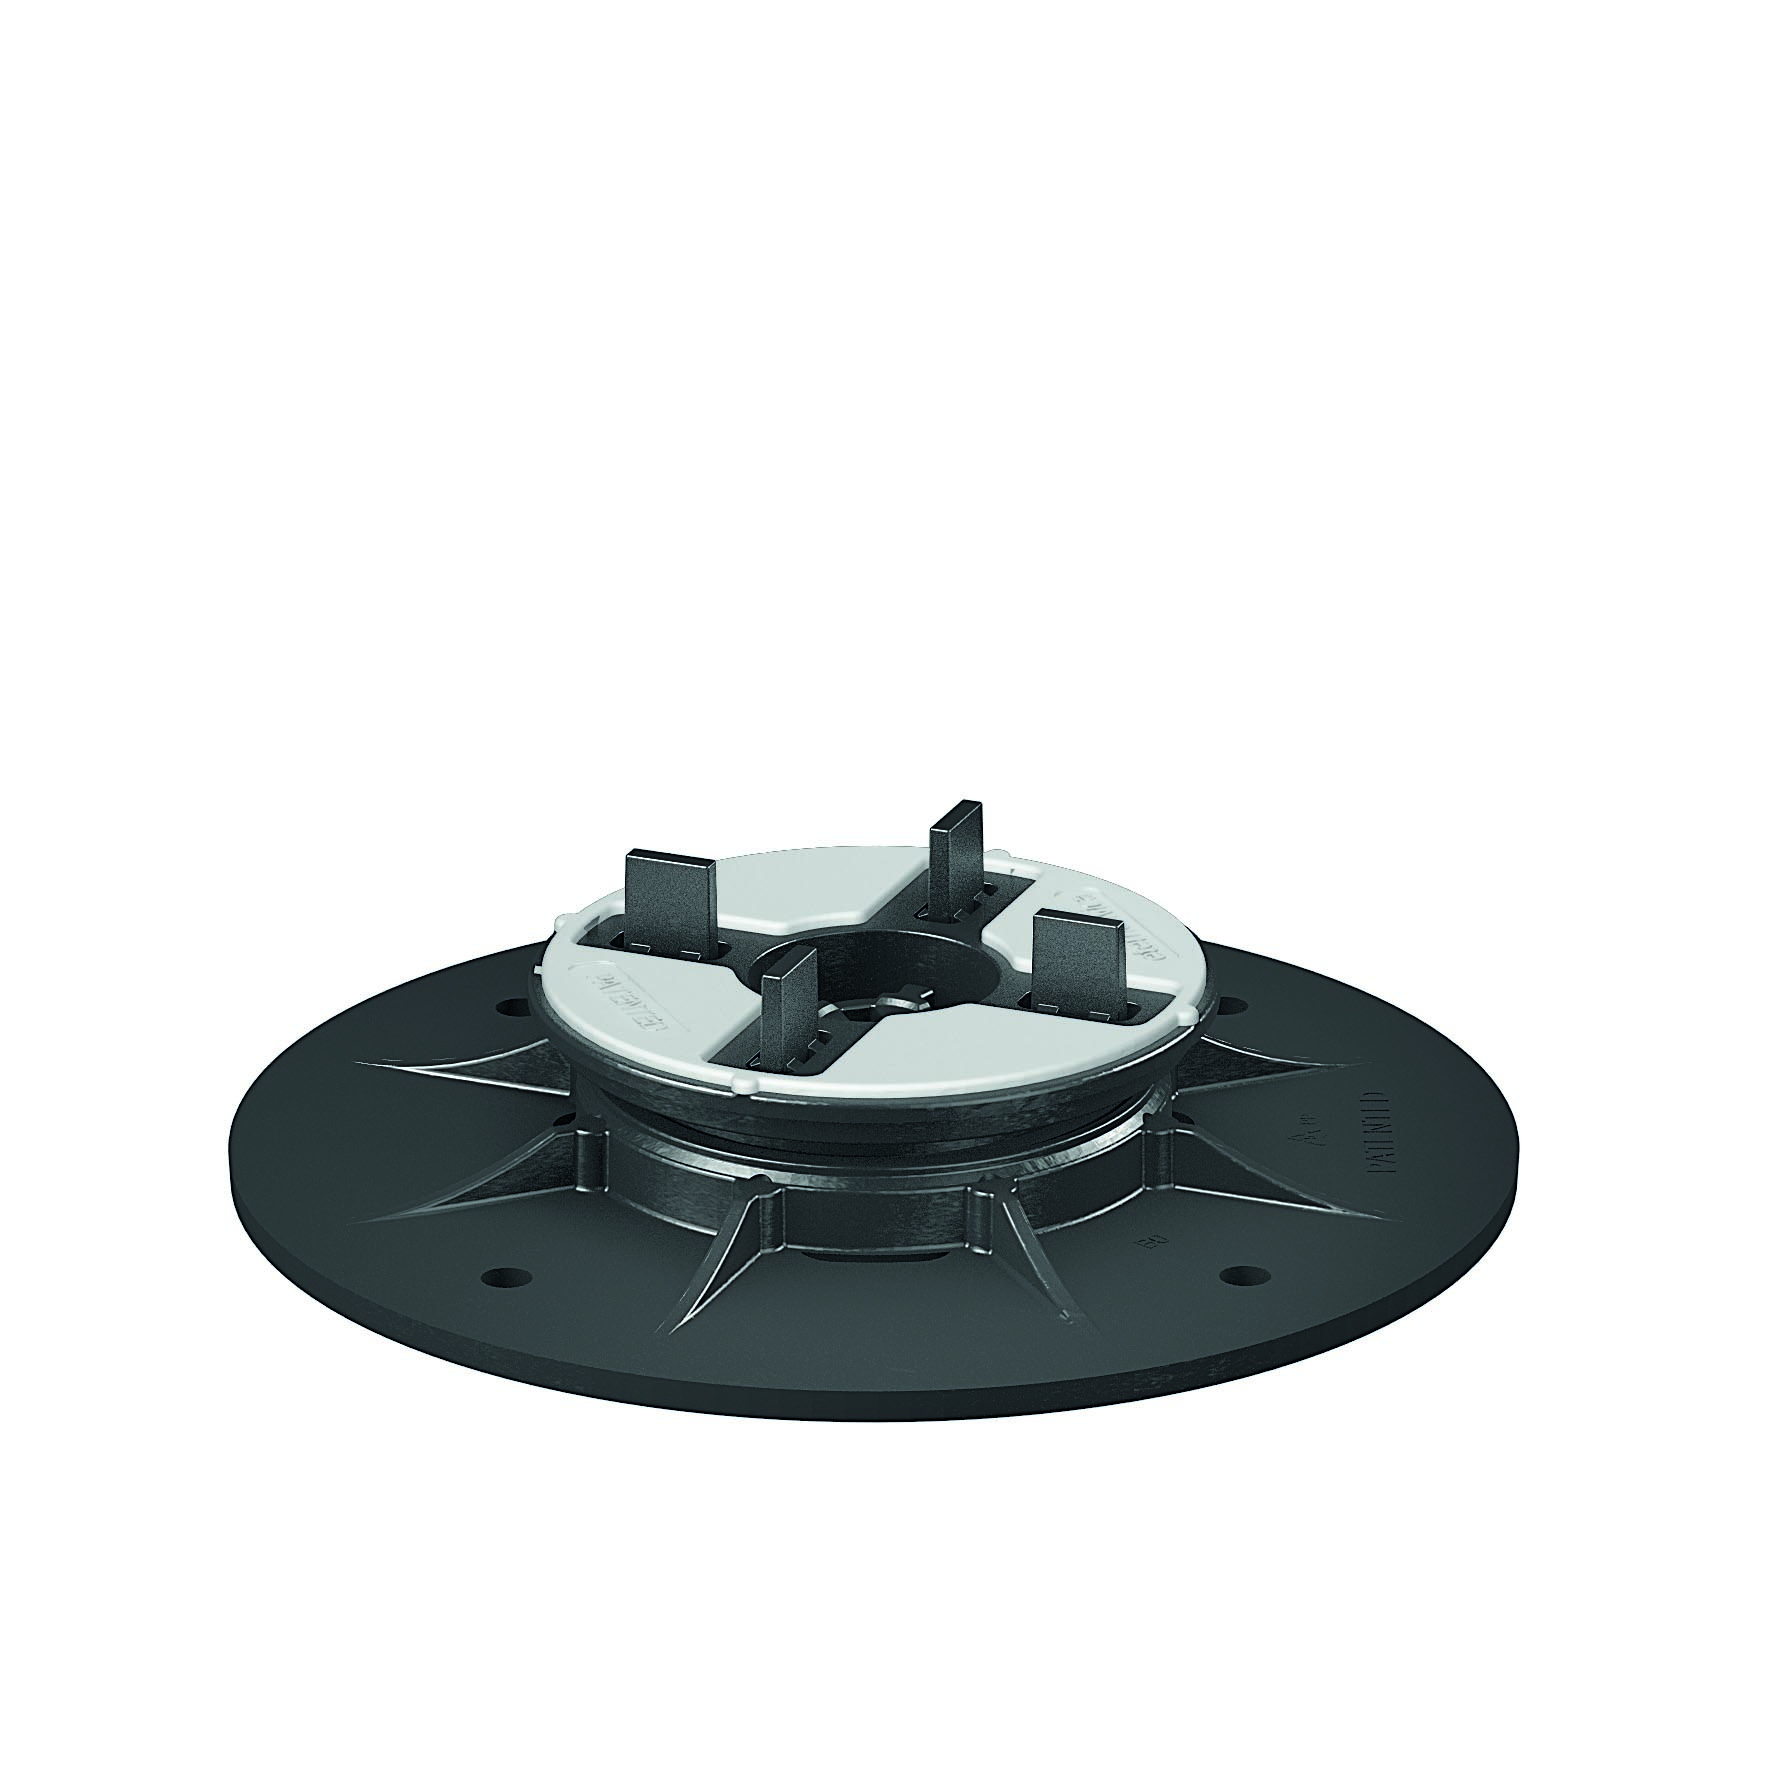 Adjustable Self-Leveling Floor Support "ETERNO" SE0 (28-38 mm) with bi-material head